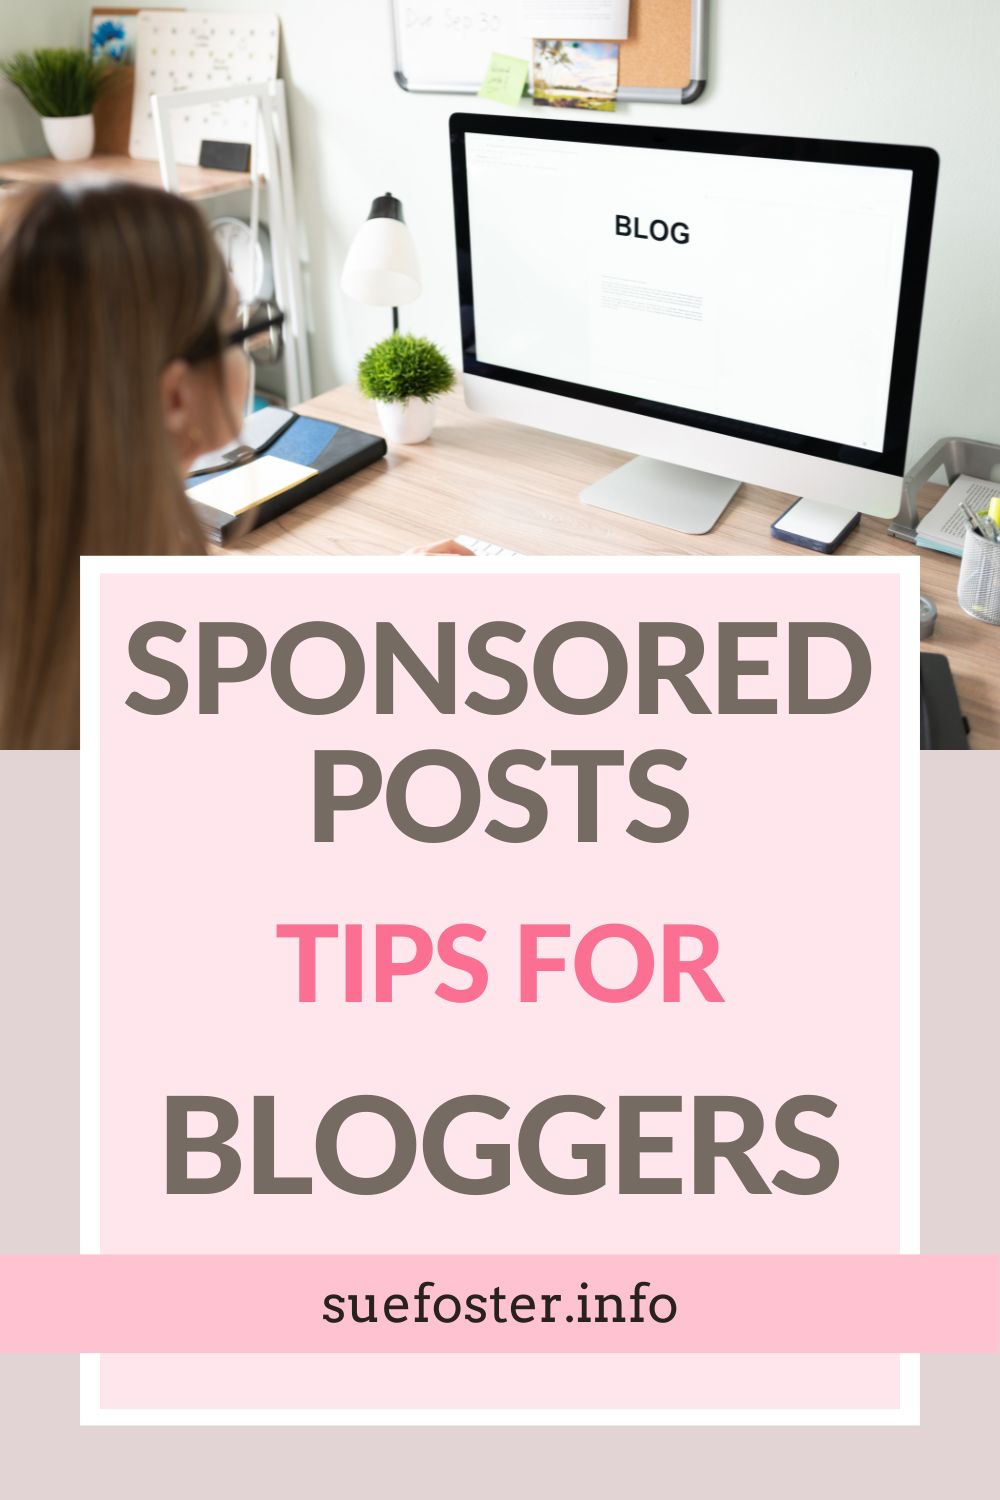 Insights on how bloggers monetise their blogs and earn through sponsored posts, including pricing and networks.